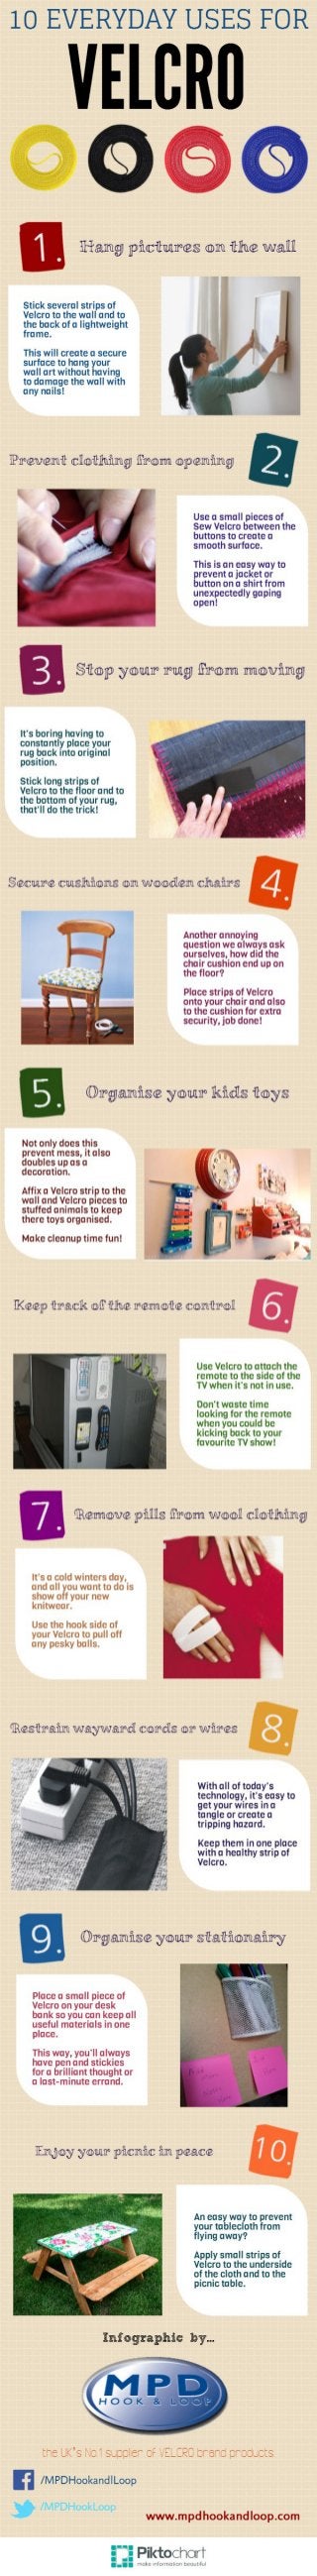 10 Everyday Uses for VELCRO